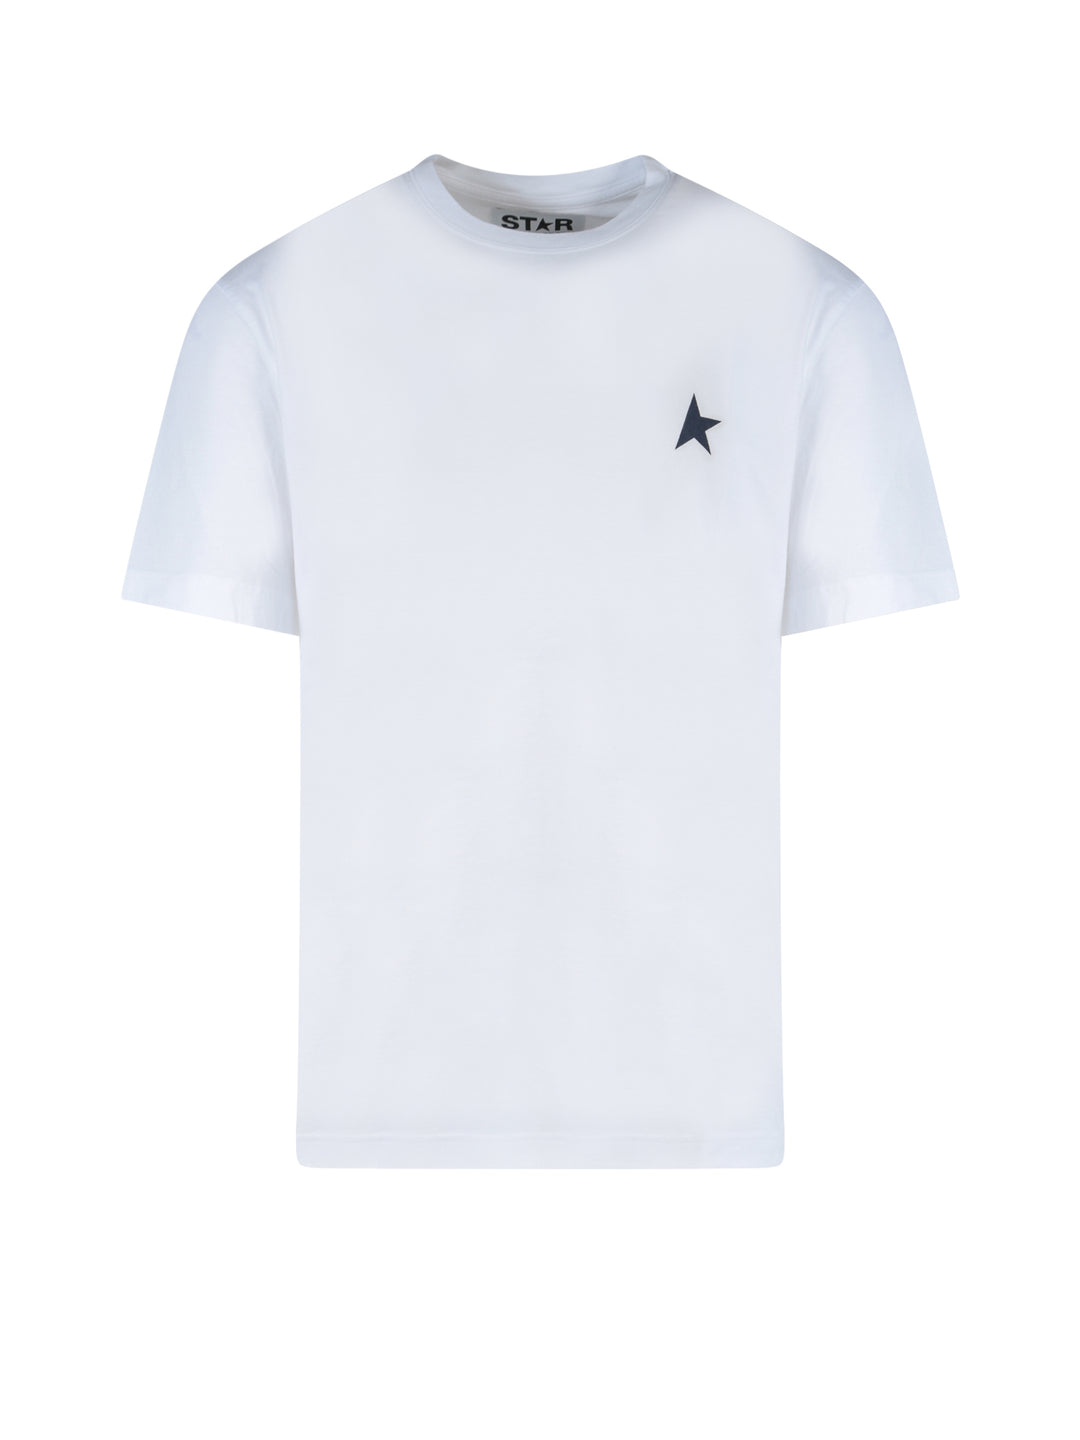 T-shirt in cotone con stampa Star